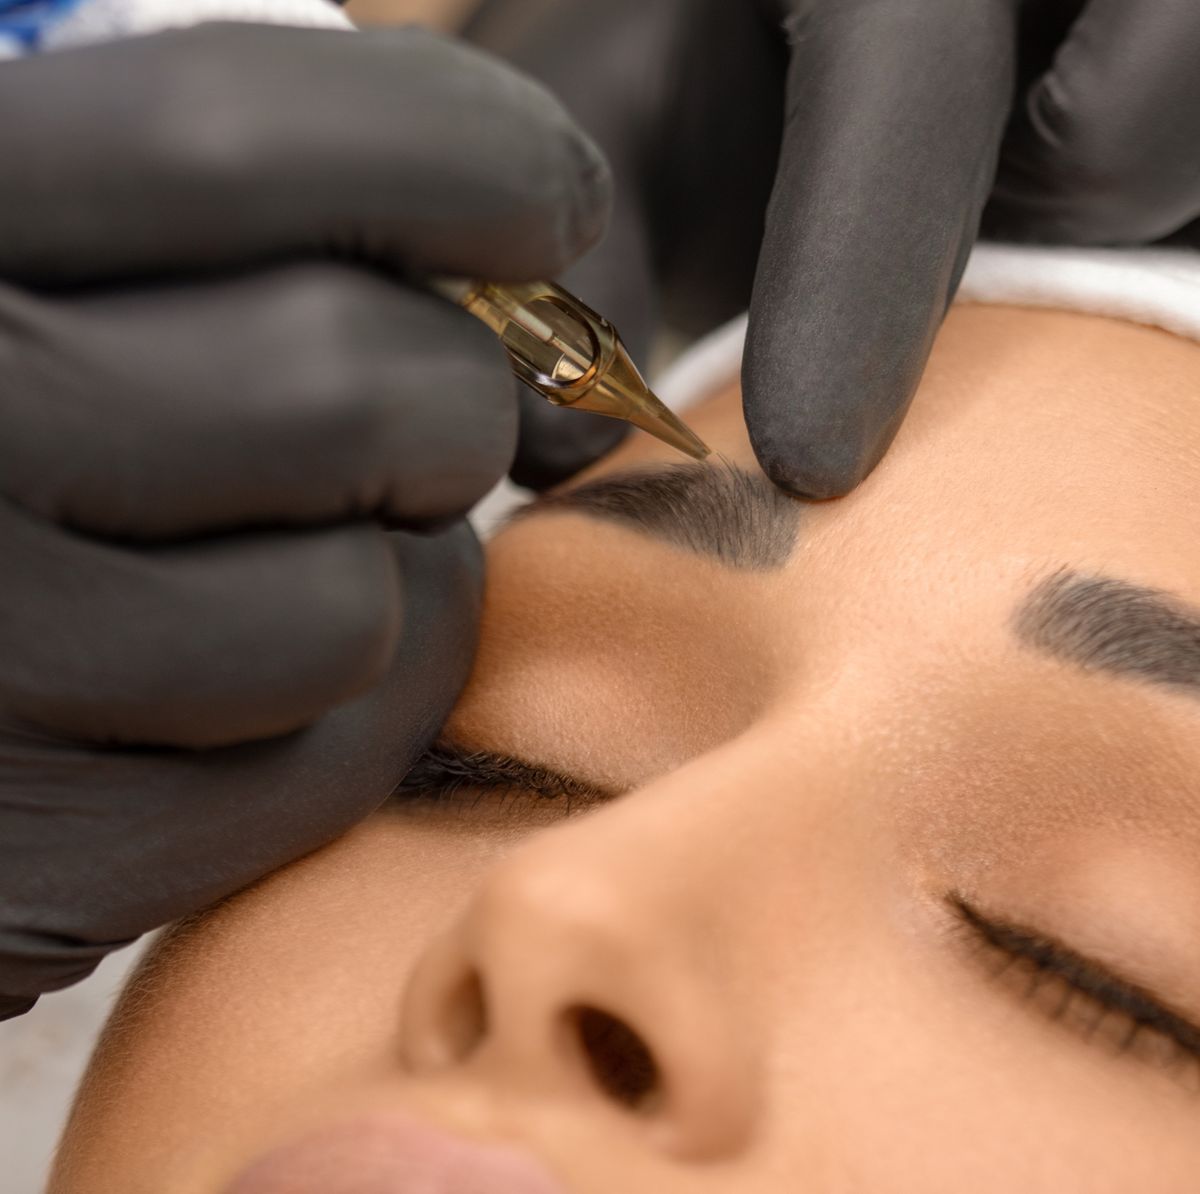 Permanent Makeup Treatment: Types, Process and Cost